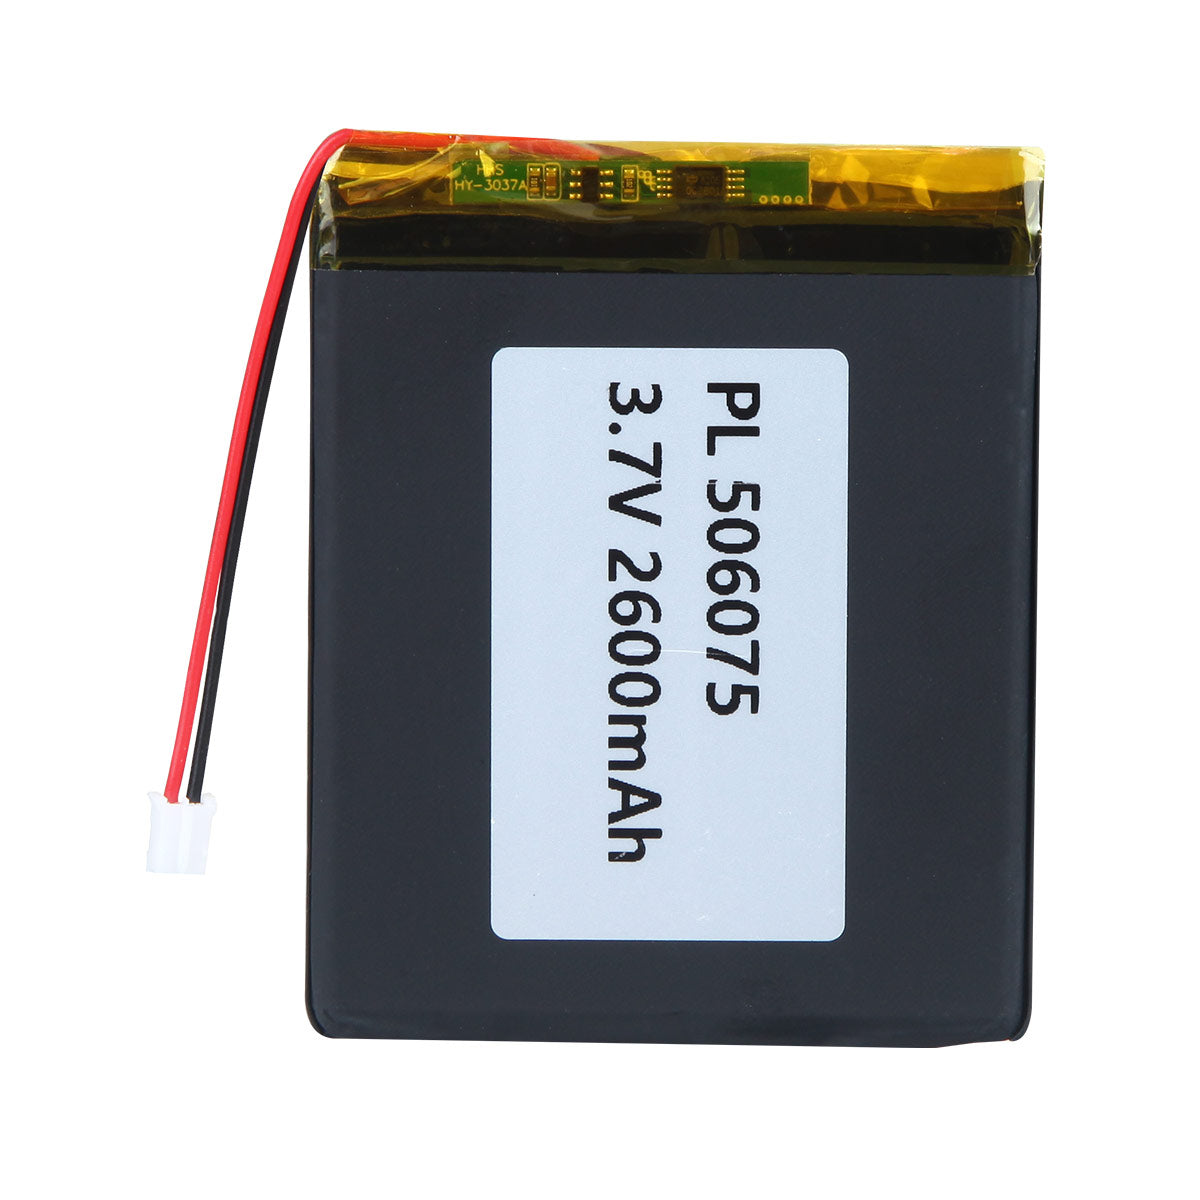 YDL 3.7V 2600mAh 506075 Rechargeable Lithium Polymer Battery Length 77mm